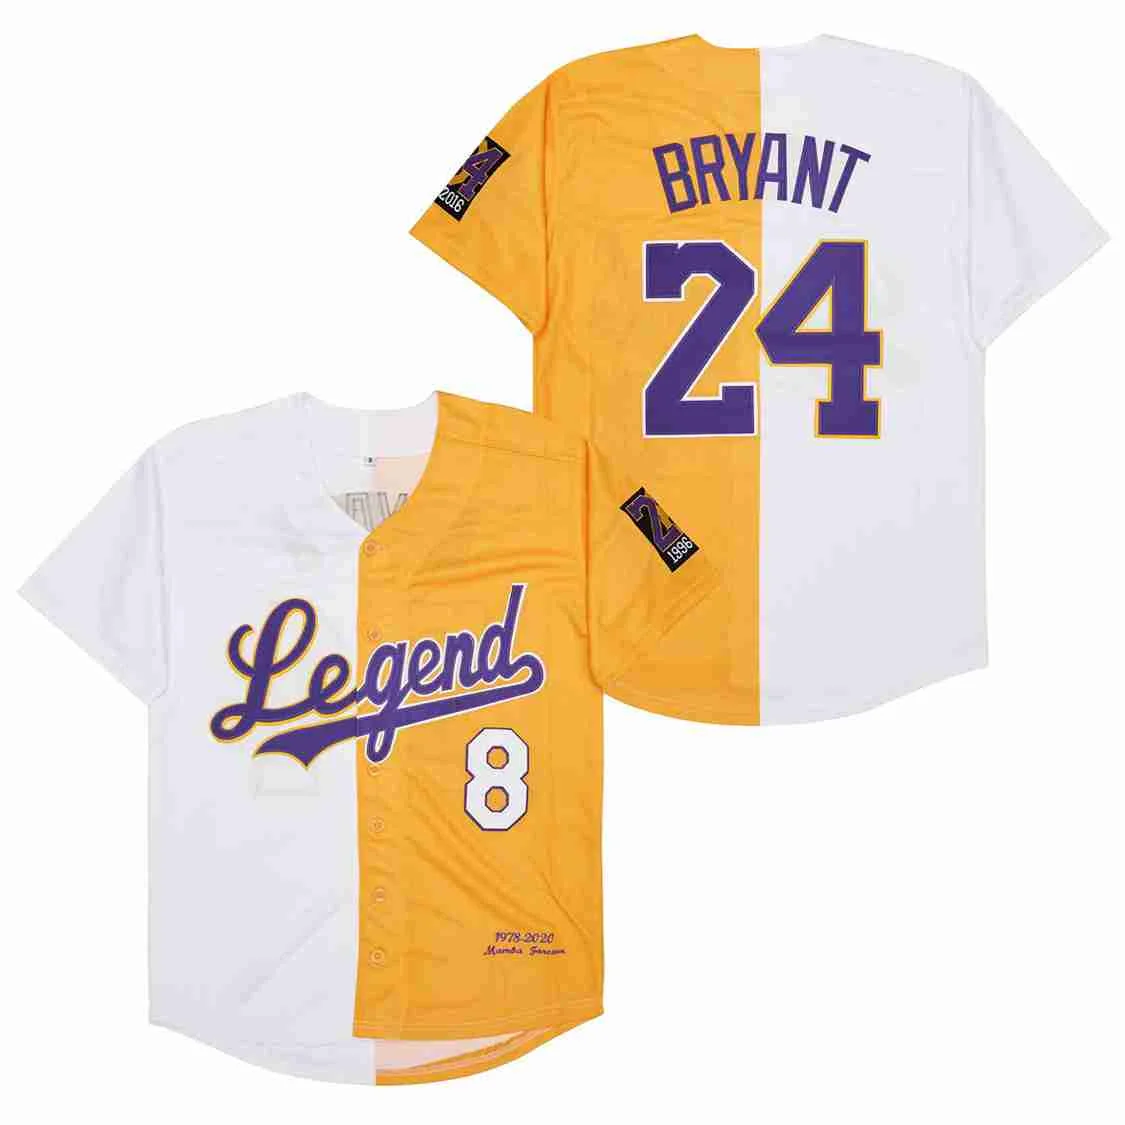 

Wholesale 1996-2016 1978-2020 Legend Bryant 8 24 White Yellow Baseball Jersey For Men Women Youth, Custom accepted